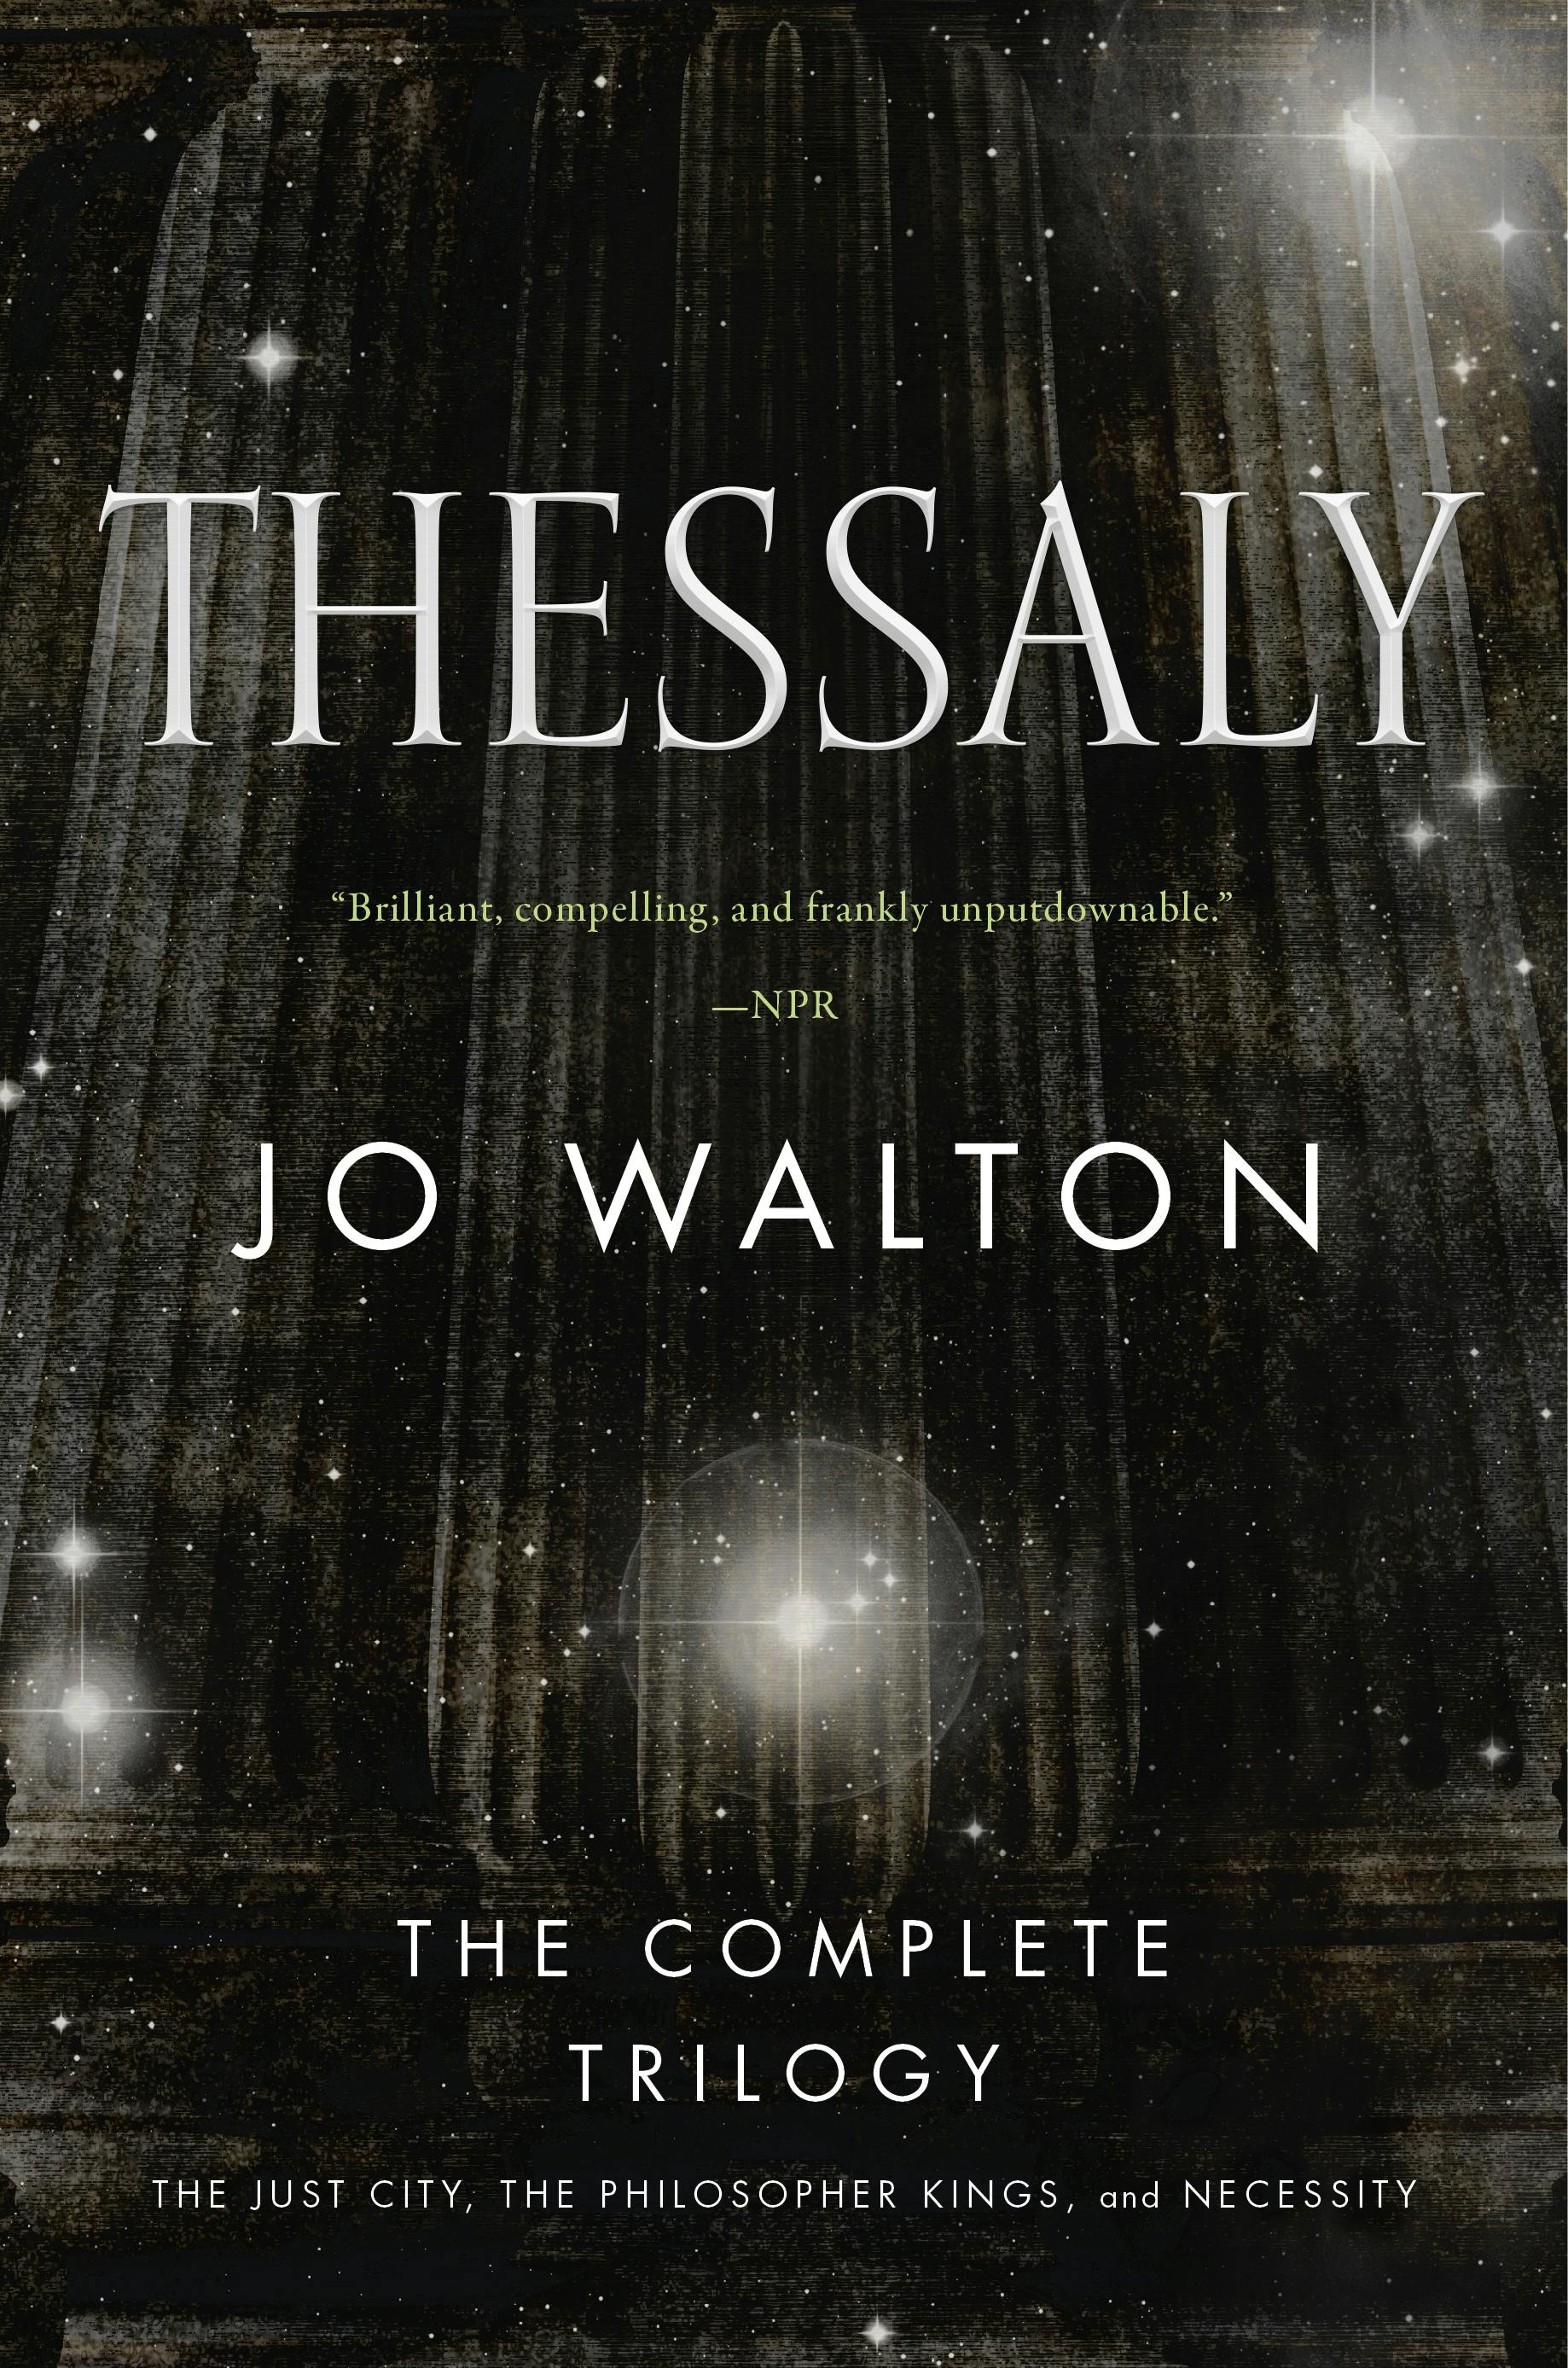 Cover for the book titled as: Thessaly